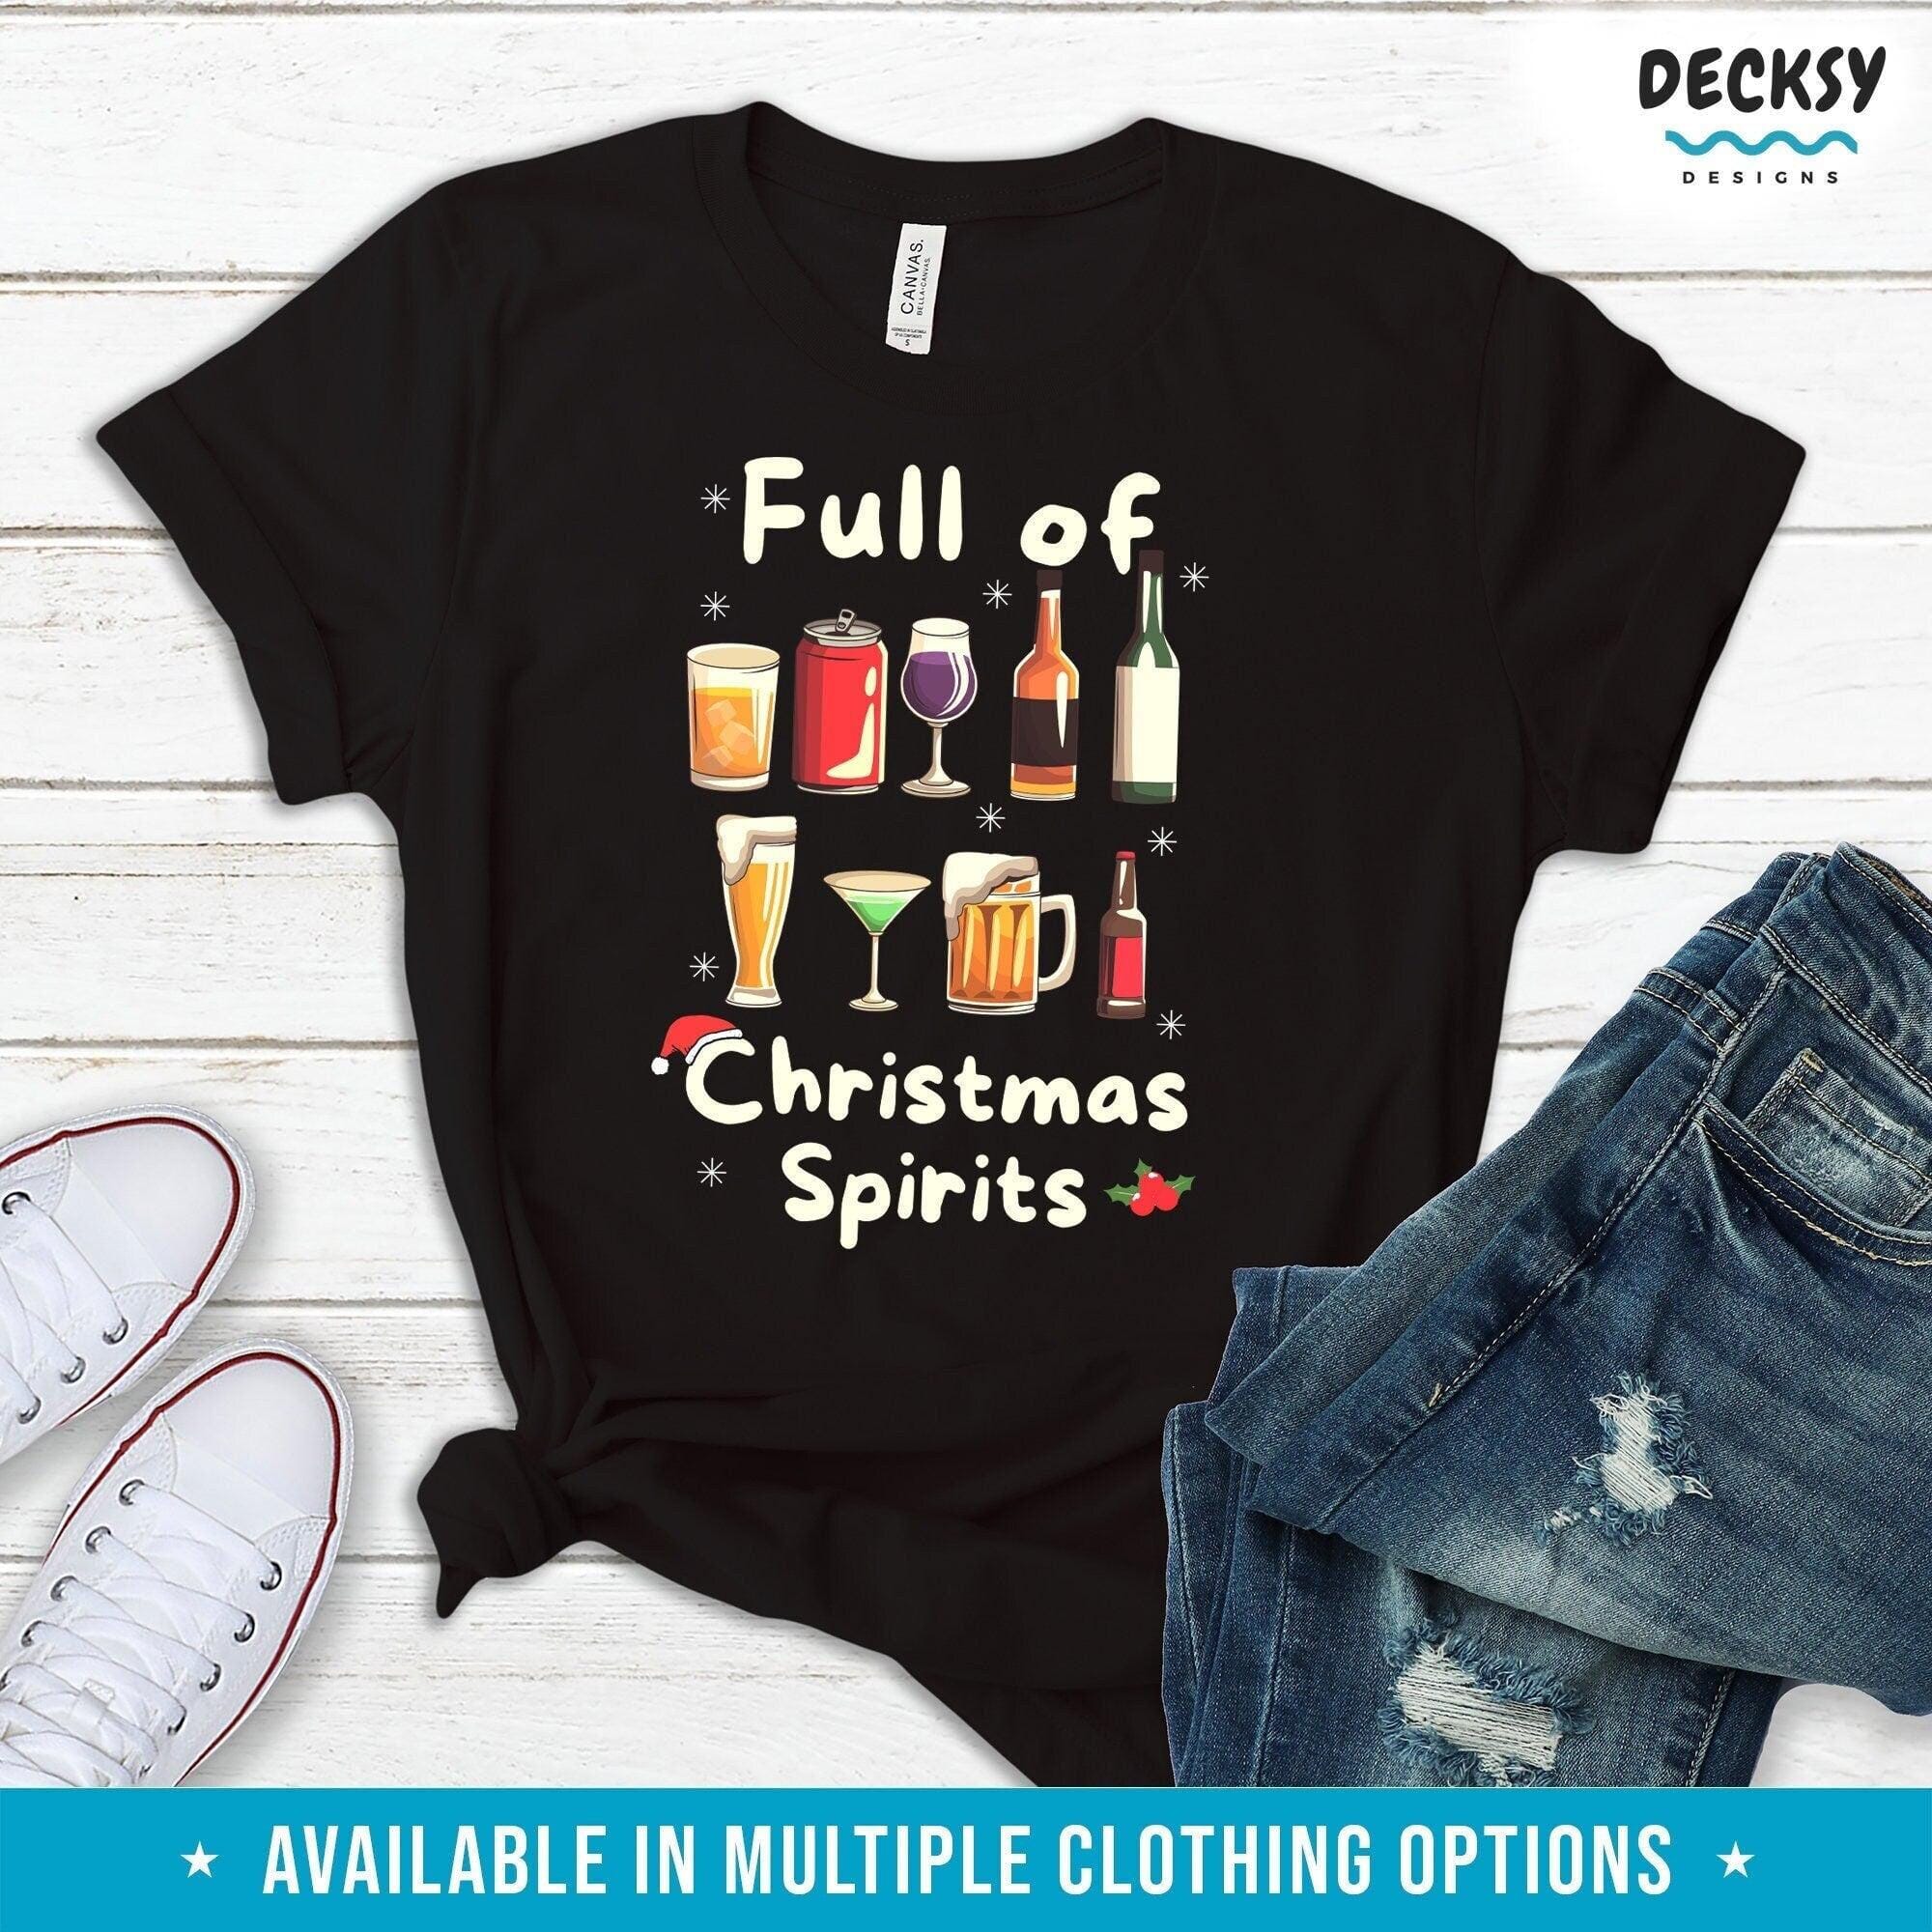 Christmas Shirt, Full of Christmas Spirits Gift-Clothing:Gender-Neutral Adult Clothing:Tops & Tees:T-shirts:Graphic Tees-DecksyDesigns